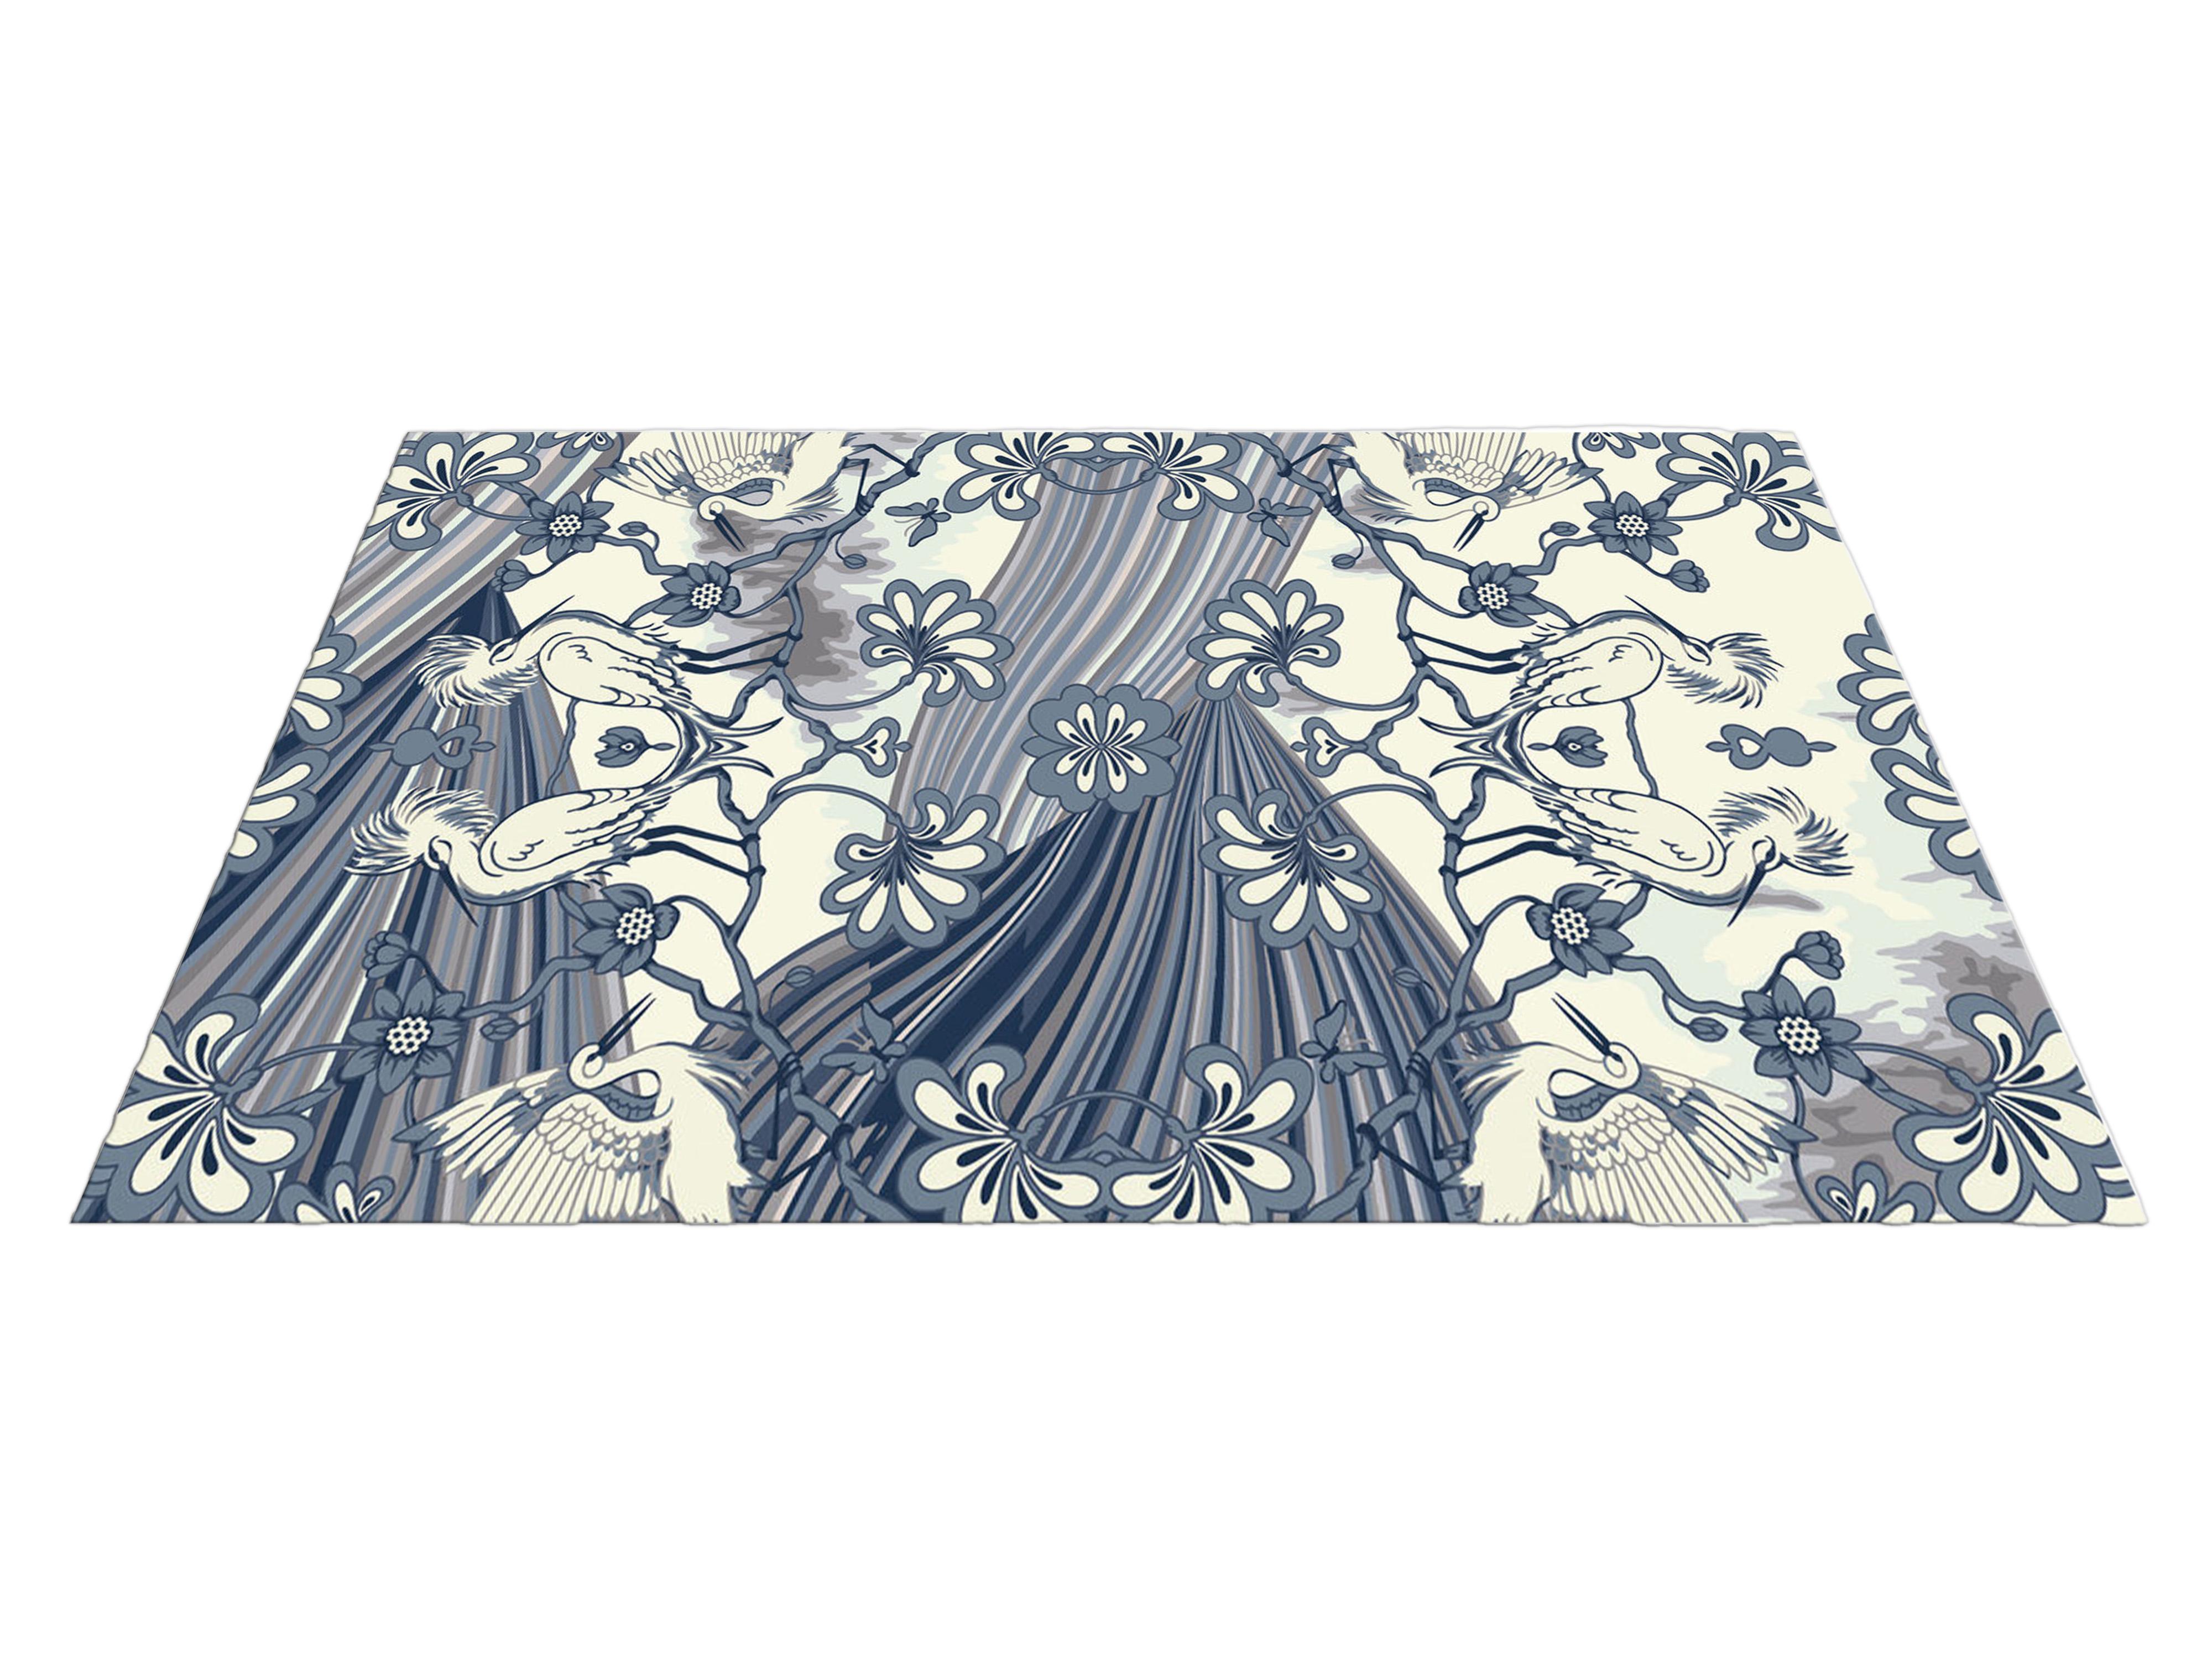 A design story of legacy and grace. A tribute to his grandparents, this was a particularly special rug for Omar to design. Fluidity, duality and functionality Hesina personifies a wilful design perspective, featuring carved Chinoiserie details,